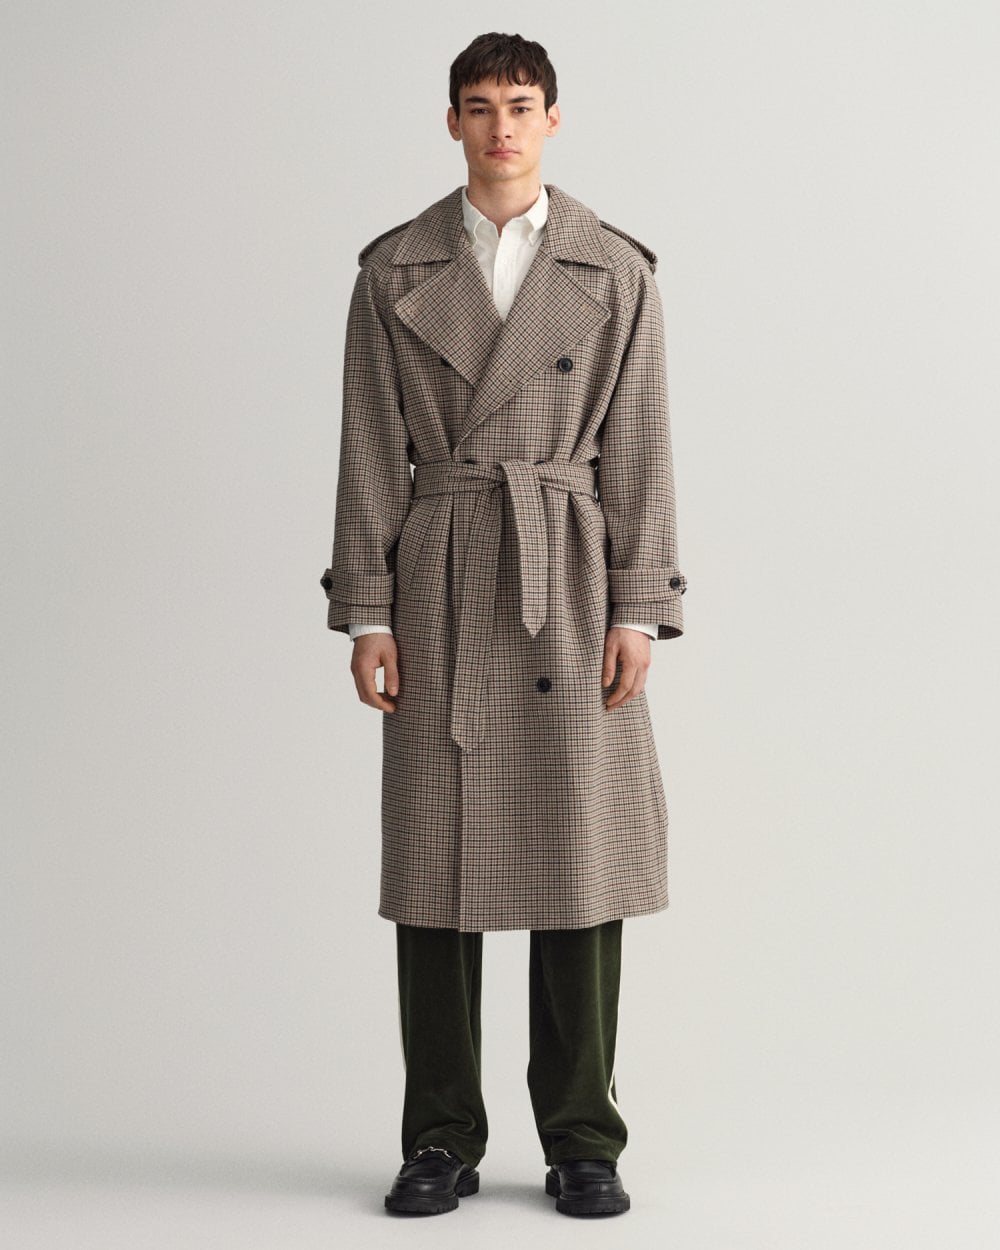 GANT Houndstooth Wool Trench Coat